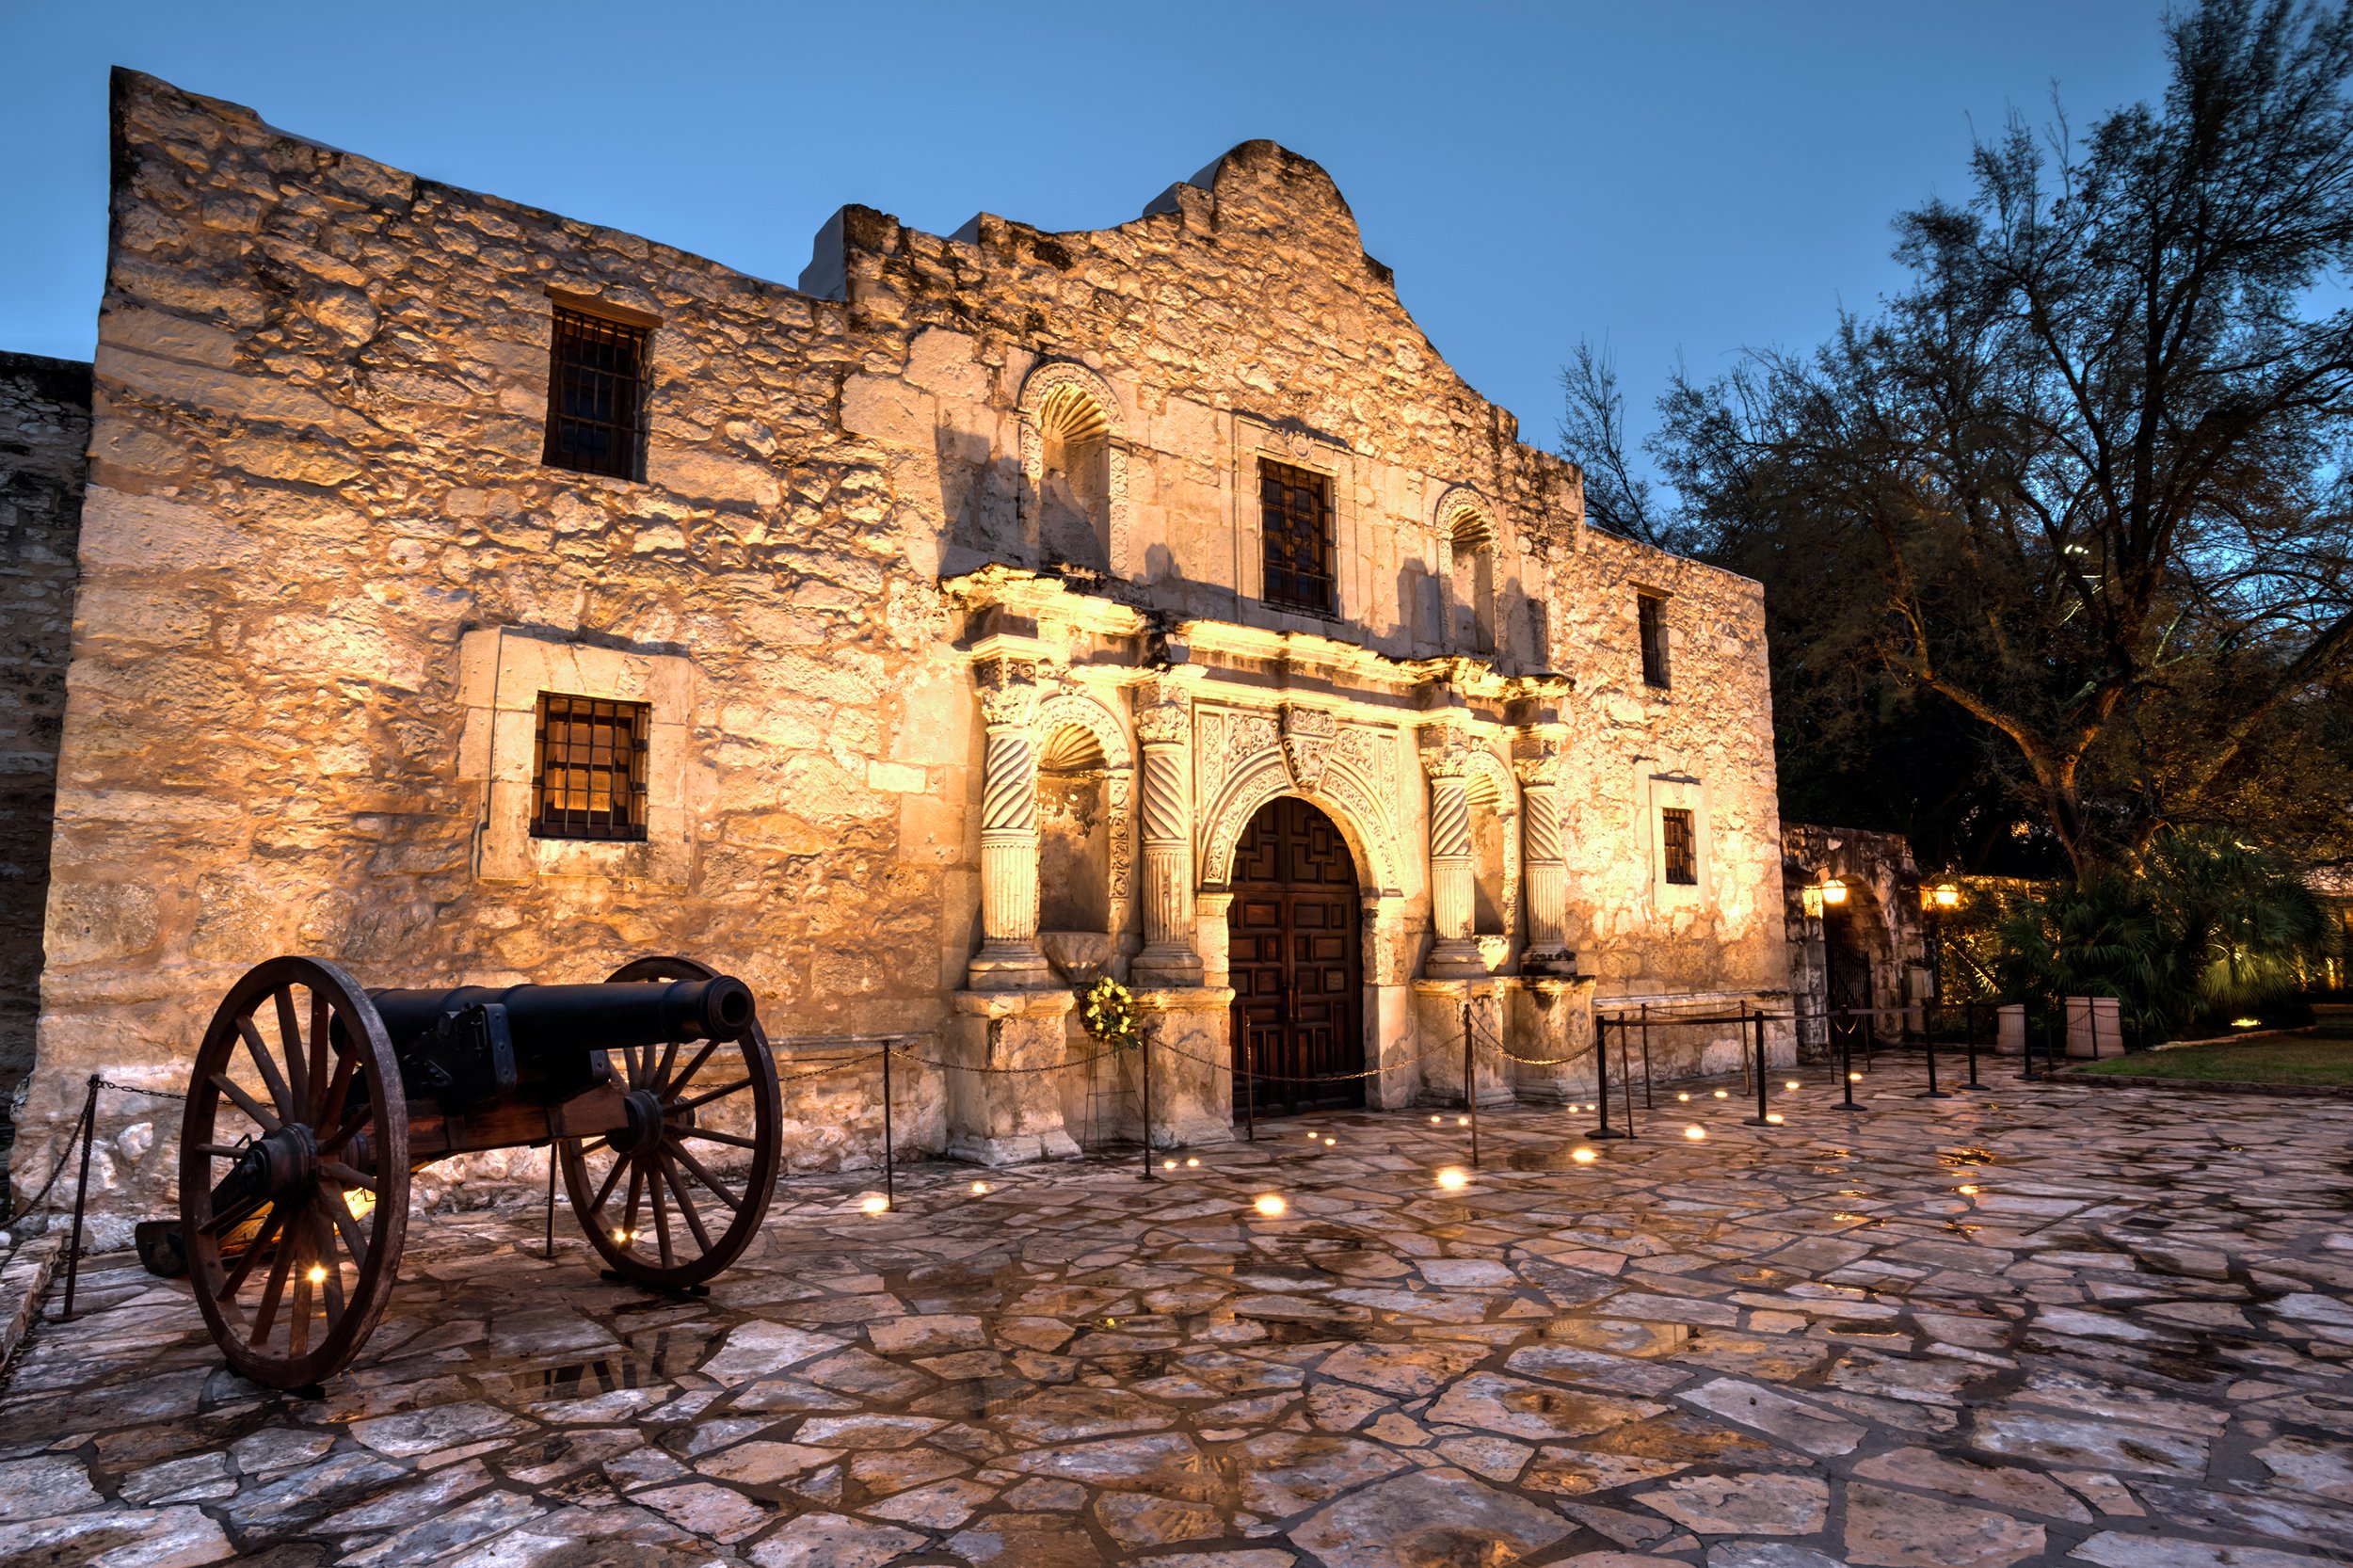 <p>For those traveling within the U.S., Texas cities are super-affordable places to explore. In particular, San Antonio — ranked No. 16 among the best cheap vacation destinations by <a href="https://travel.usnews.com/rankings/best-affordable-usa-destinations/">U.S. News & World Report</a> — is a must-visit spot in the state. San Antonio's burgeoning restaurant scene, the Alamo historic site (the five area missions are Texas' only UNESCO World Heritage site), and the nearby Natural Bridge Caverns make it a unique place to explore on a budget. With its famed River Walk, San Antonio is also very pedestrian friendly. </p>